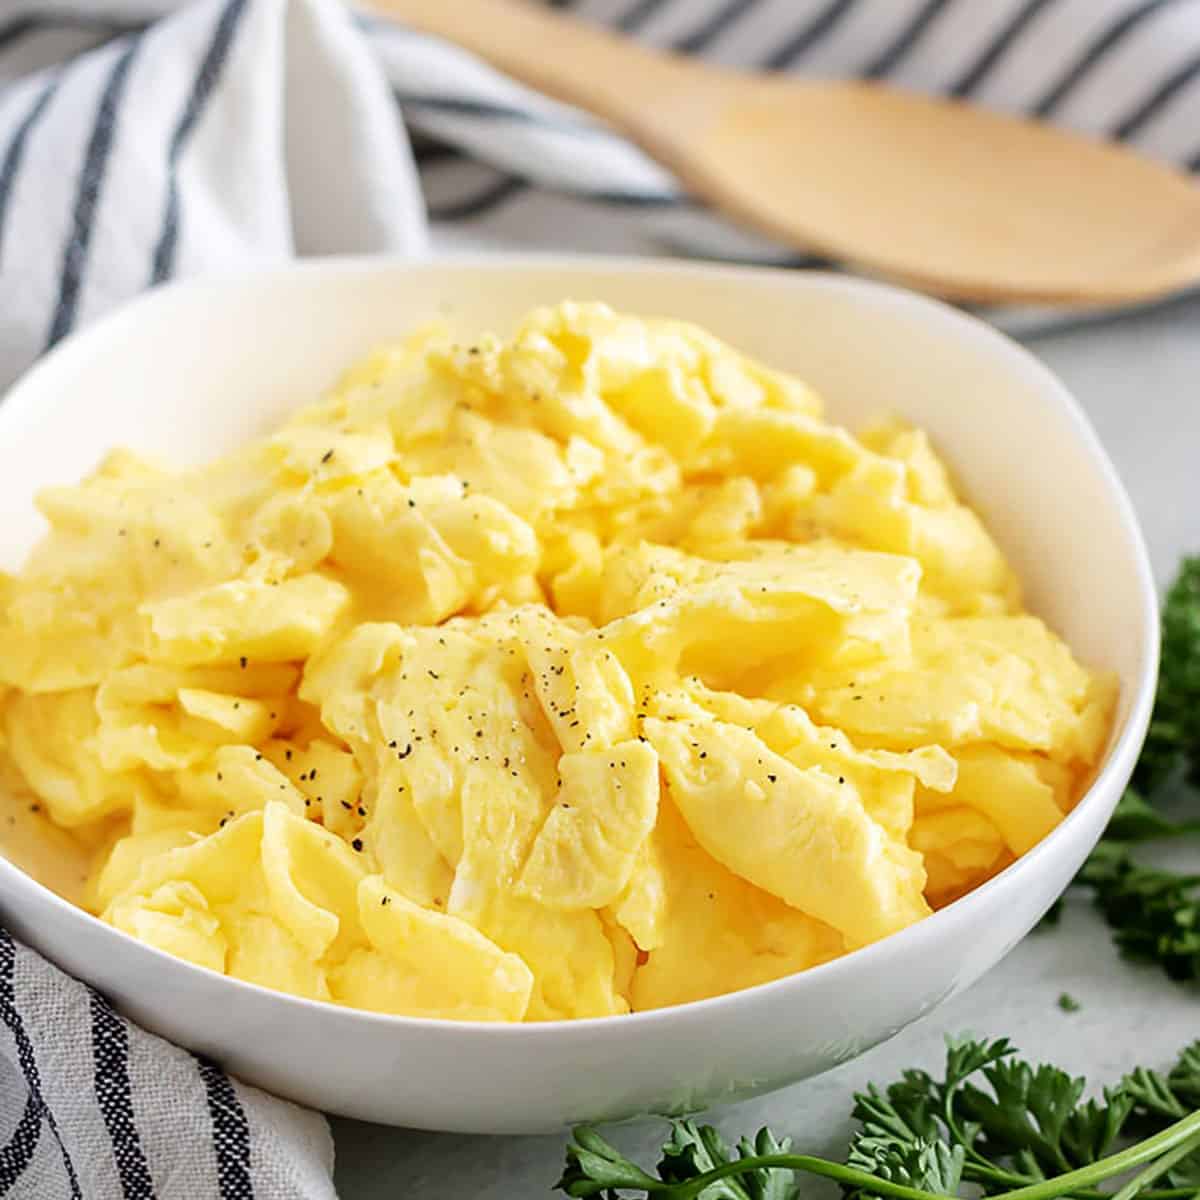 Fluffy scrambled eggs sprinkled with pepper in a white bowl.